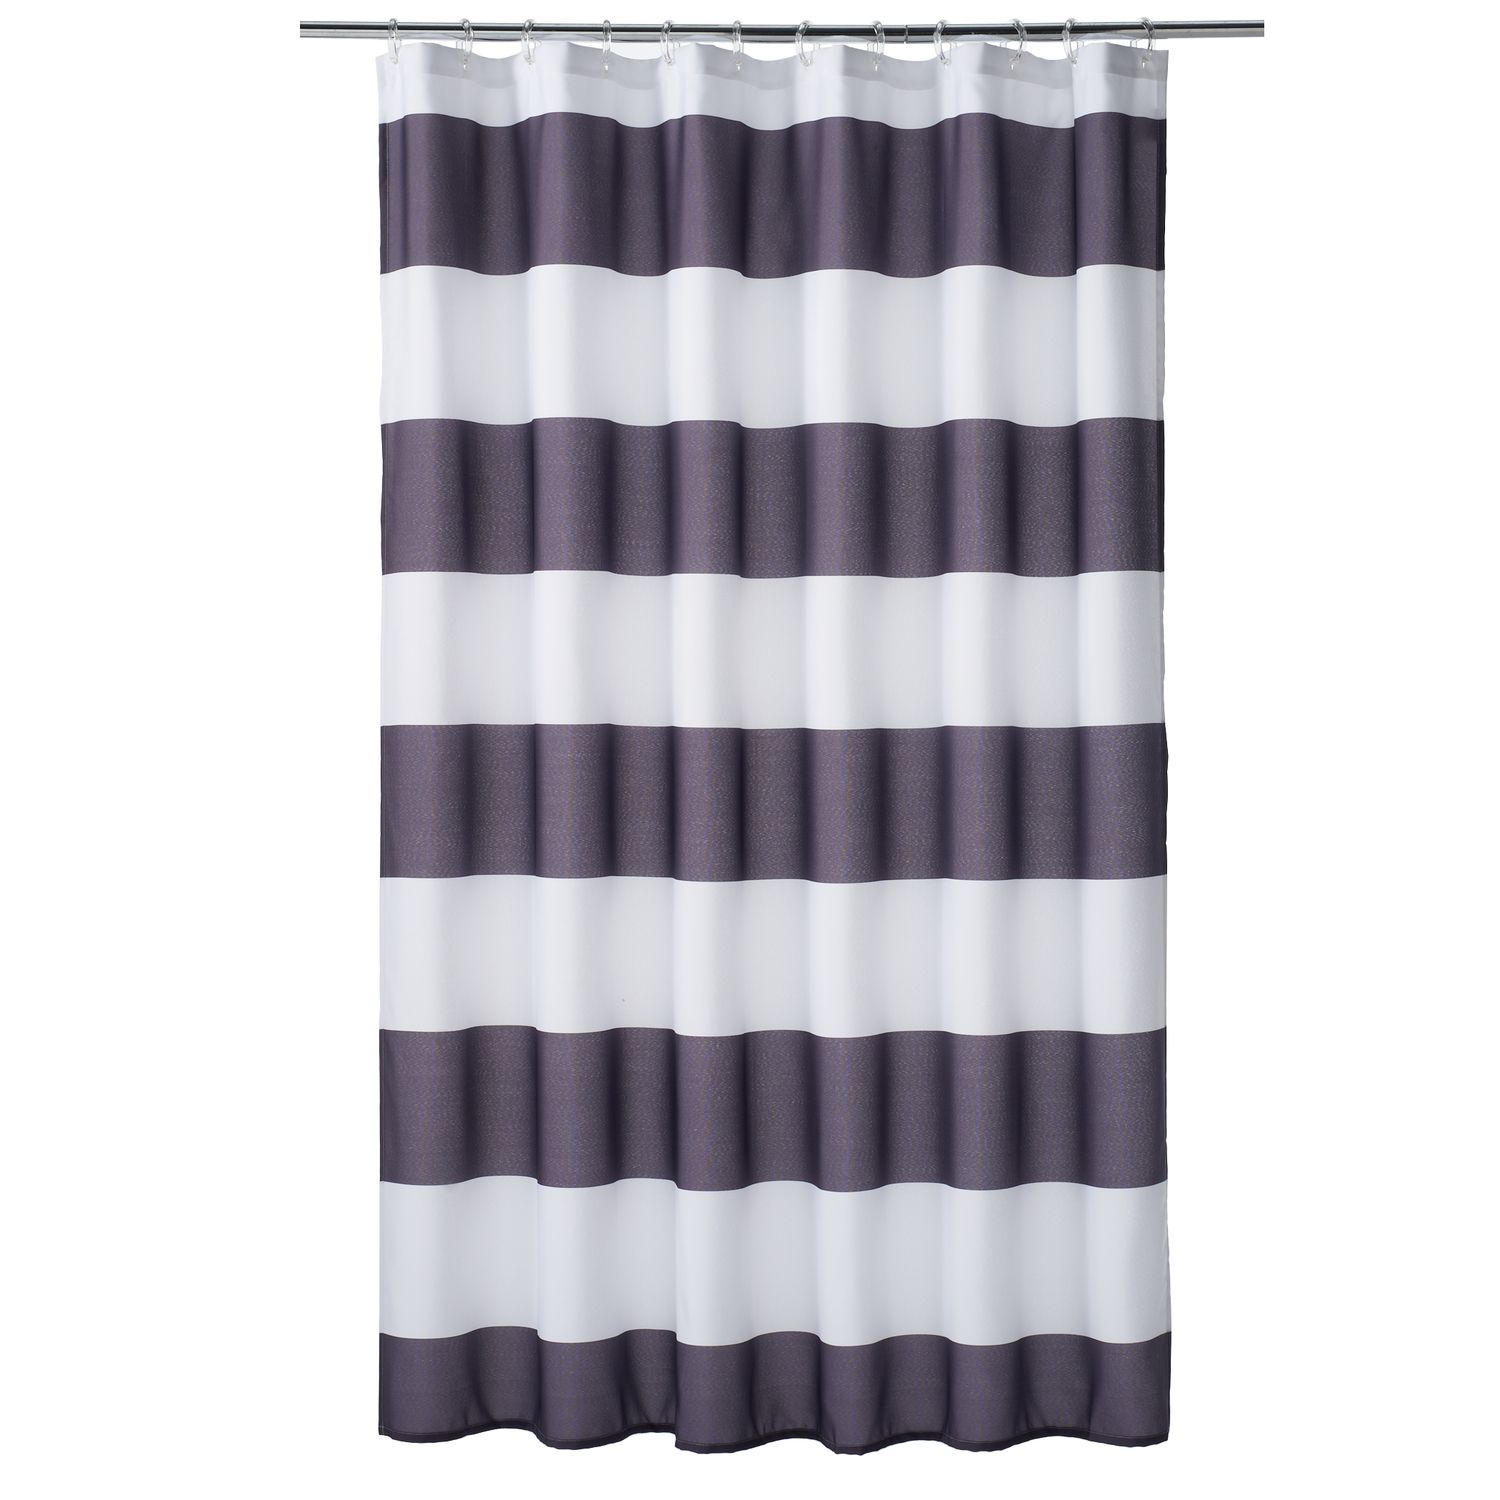 Image for Home Classics Porter Stripe Shower Curtain at Kohl's.